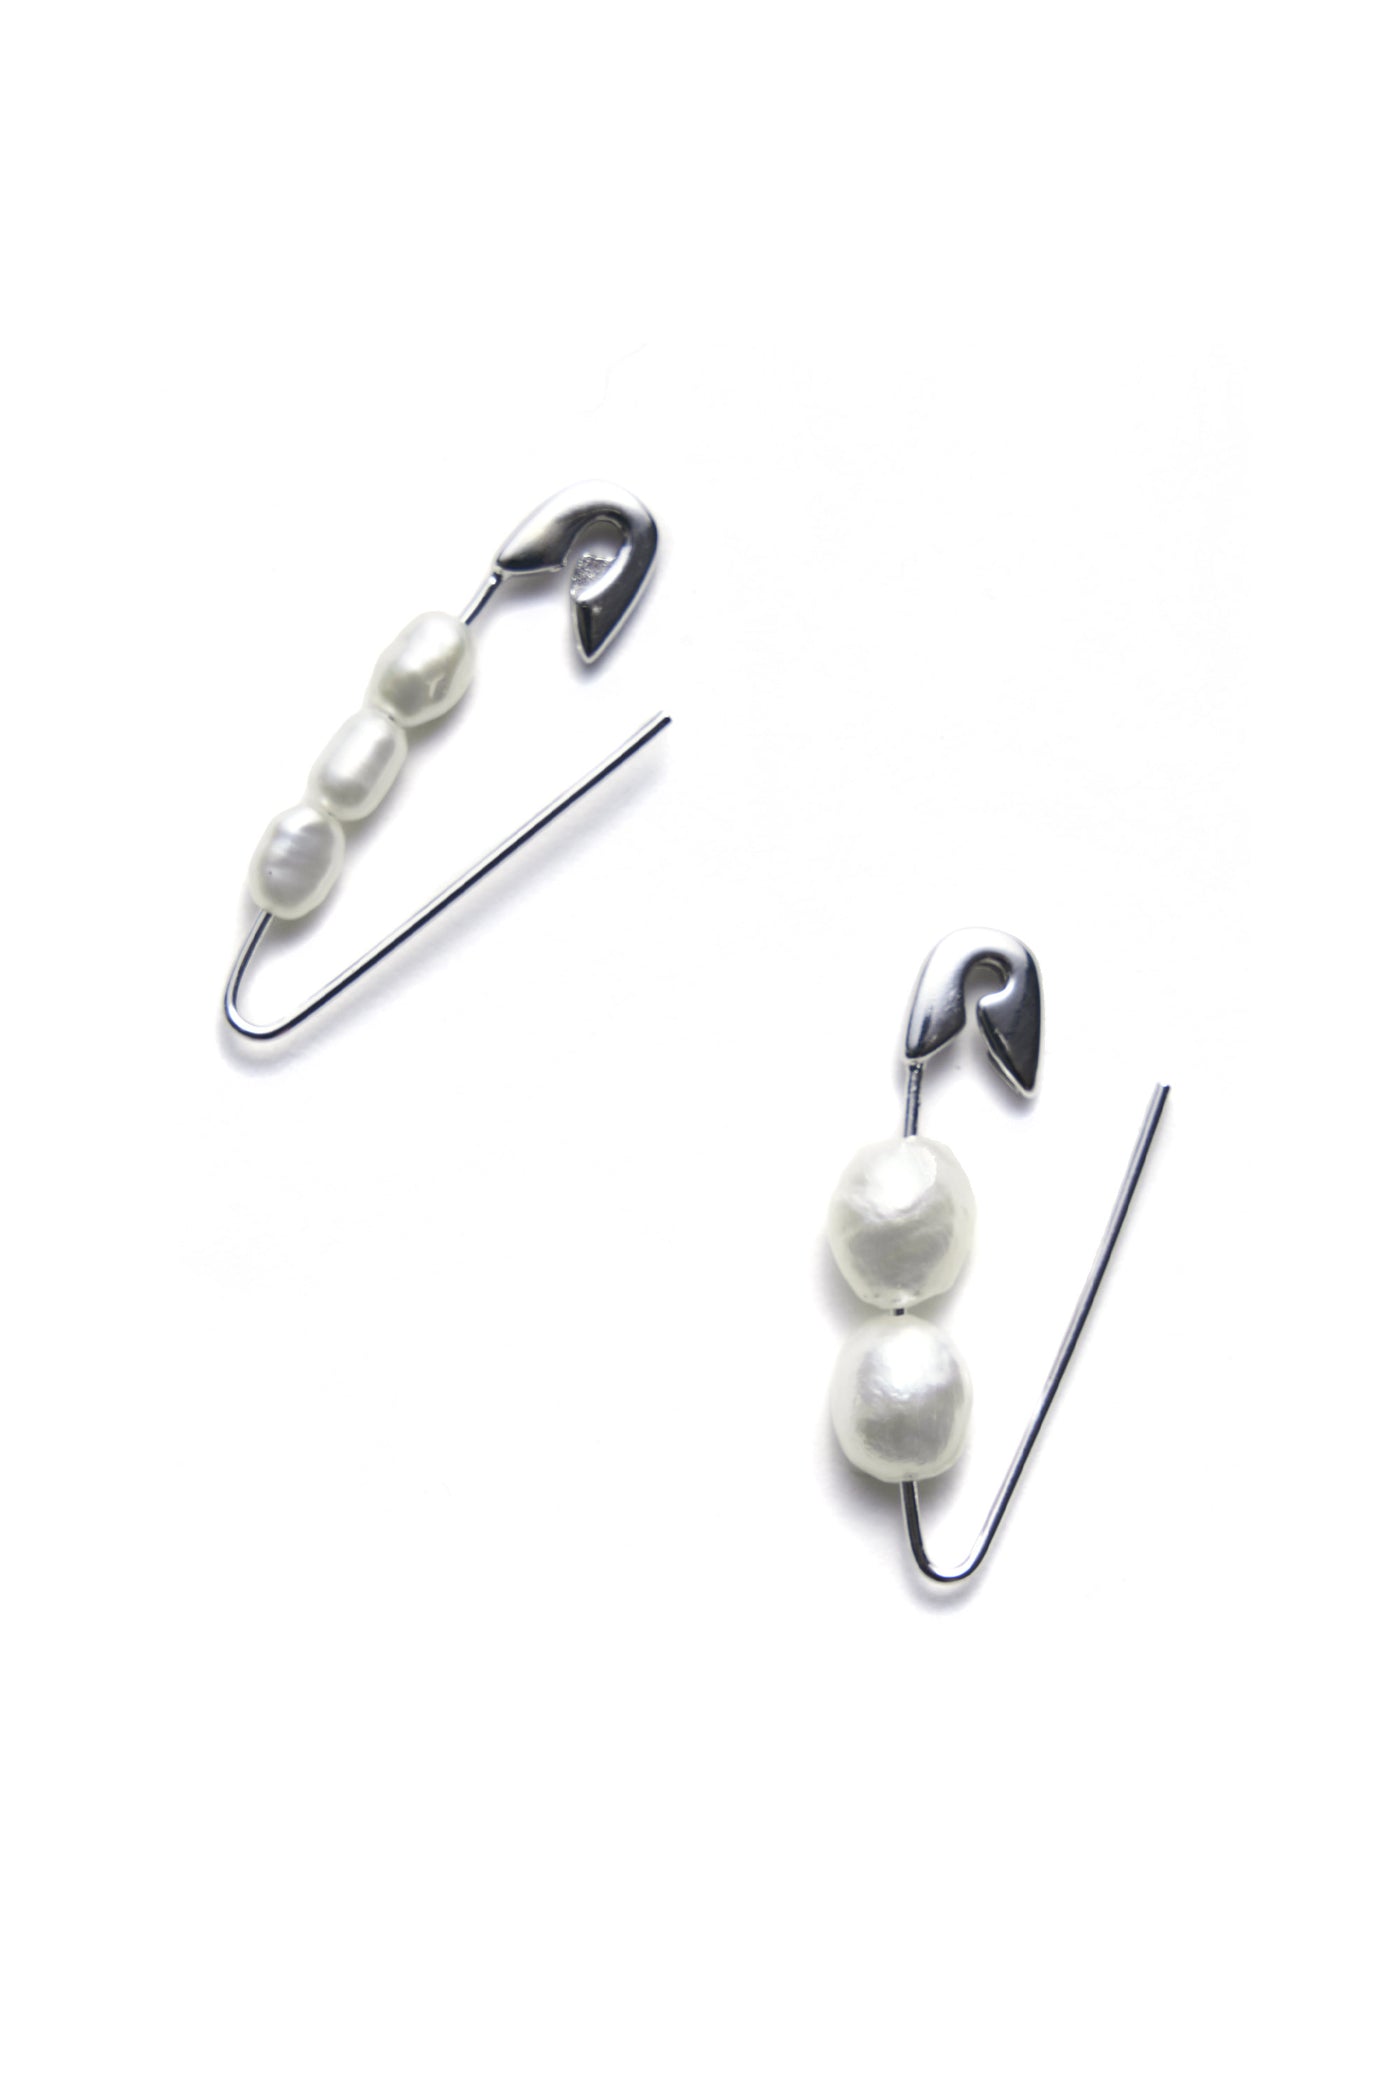 Bianca Mavrick Jewellery Safety Pin Earrings Sterling Silver Mismatched Pearls Open